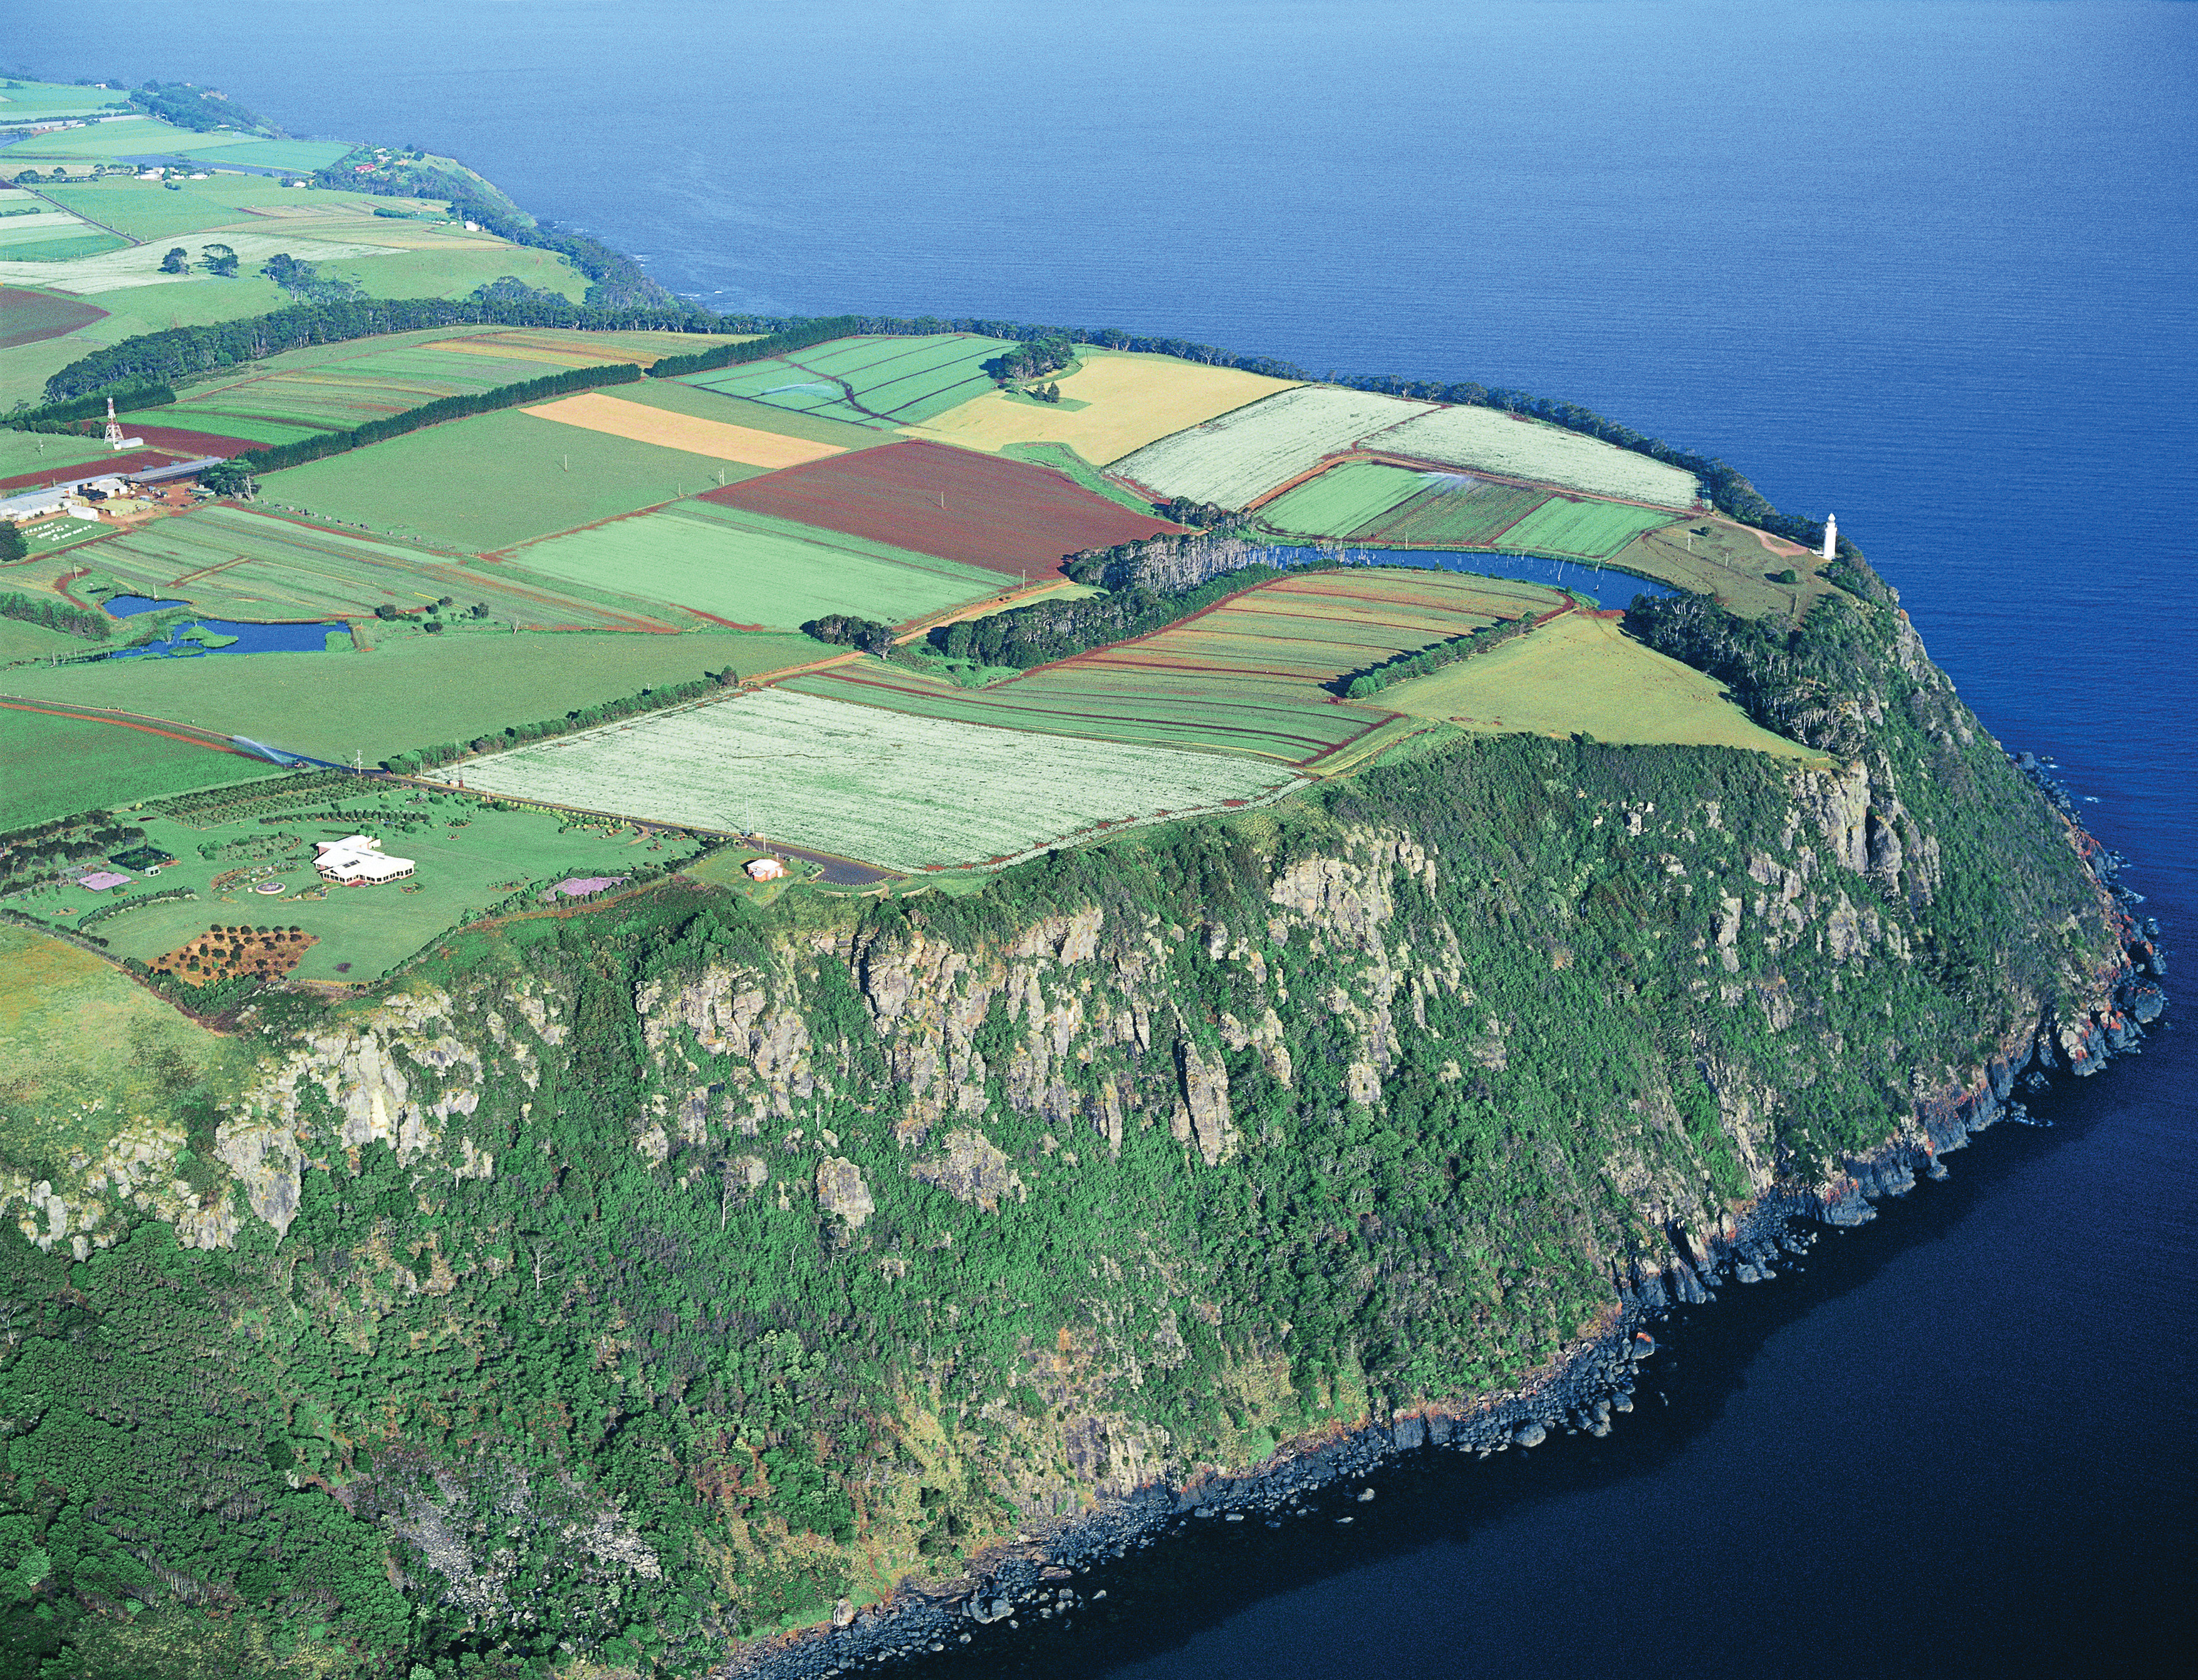 An incredible aerial view of the Table Cape. A variety of coloured patchwork fields fill the area, with a lighthouse on the edge of the Table Cape.